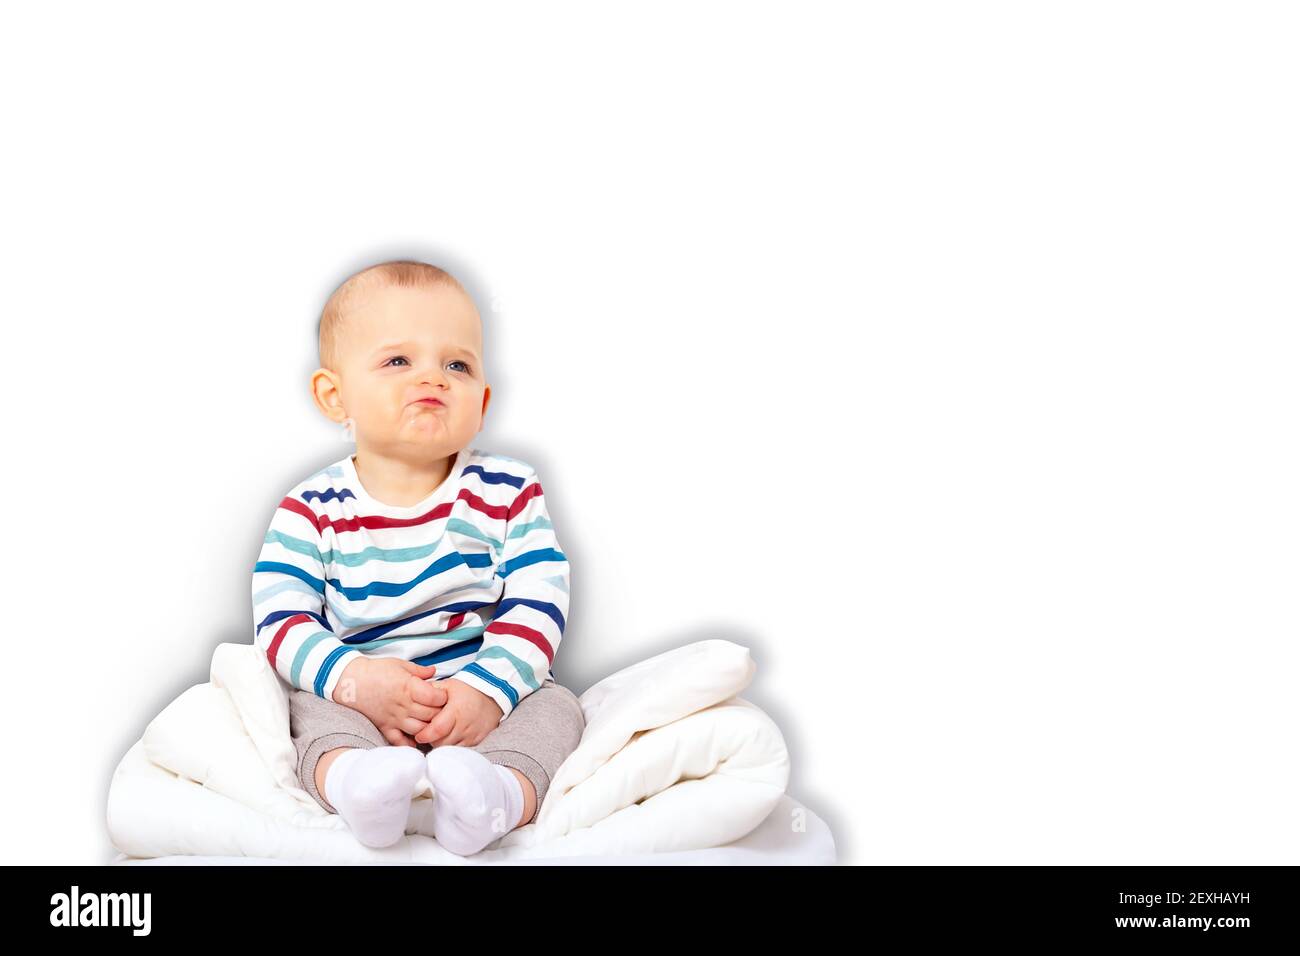 Funny caucasian baby boy in striped t-shirt sitting on pillow mountain. Isolated on white background.  Stock Photo